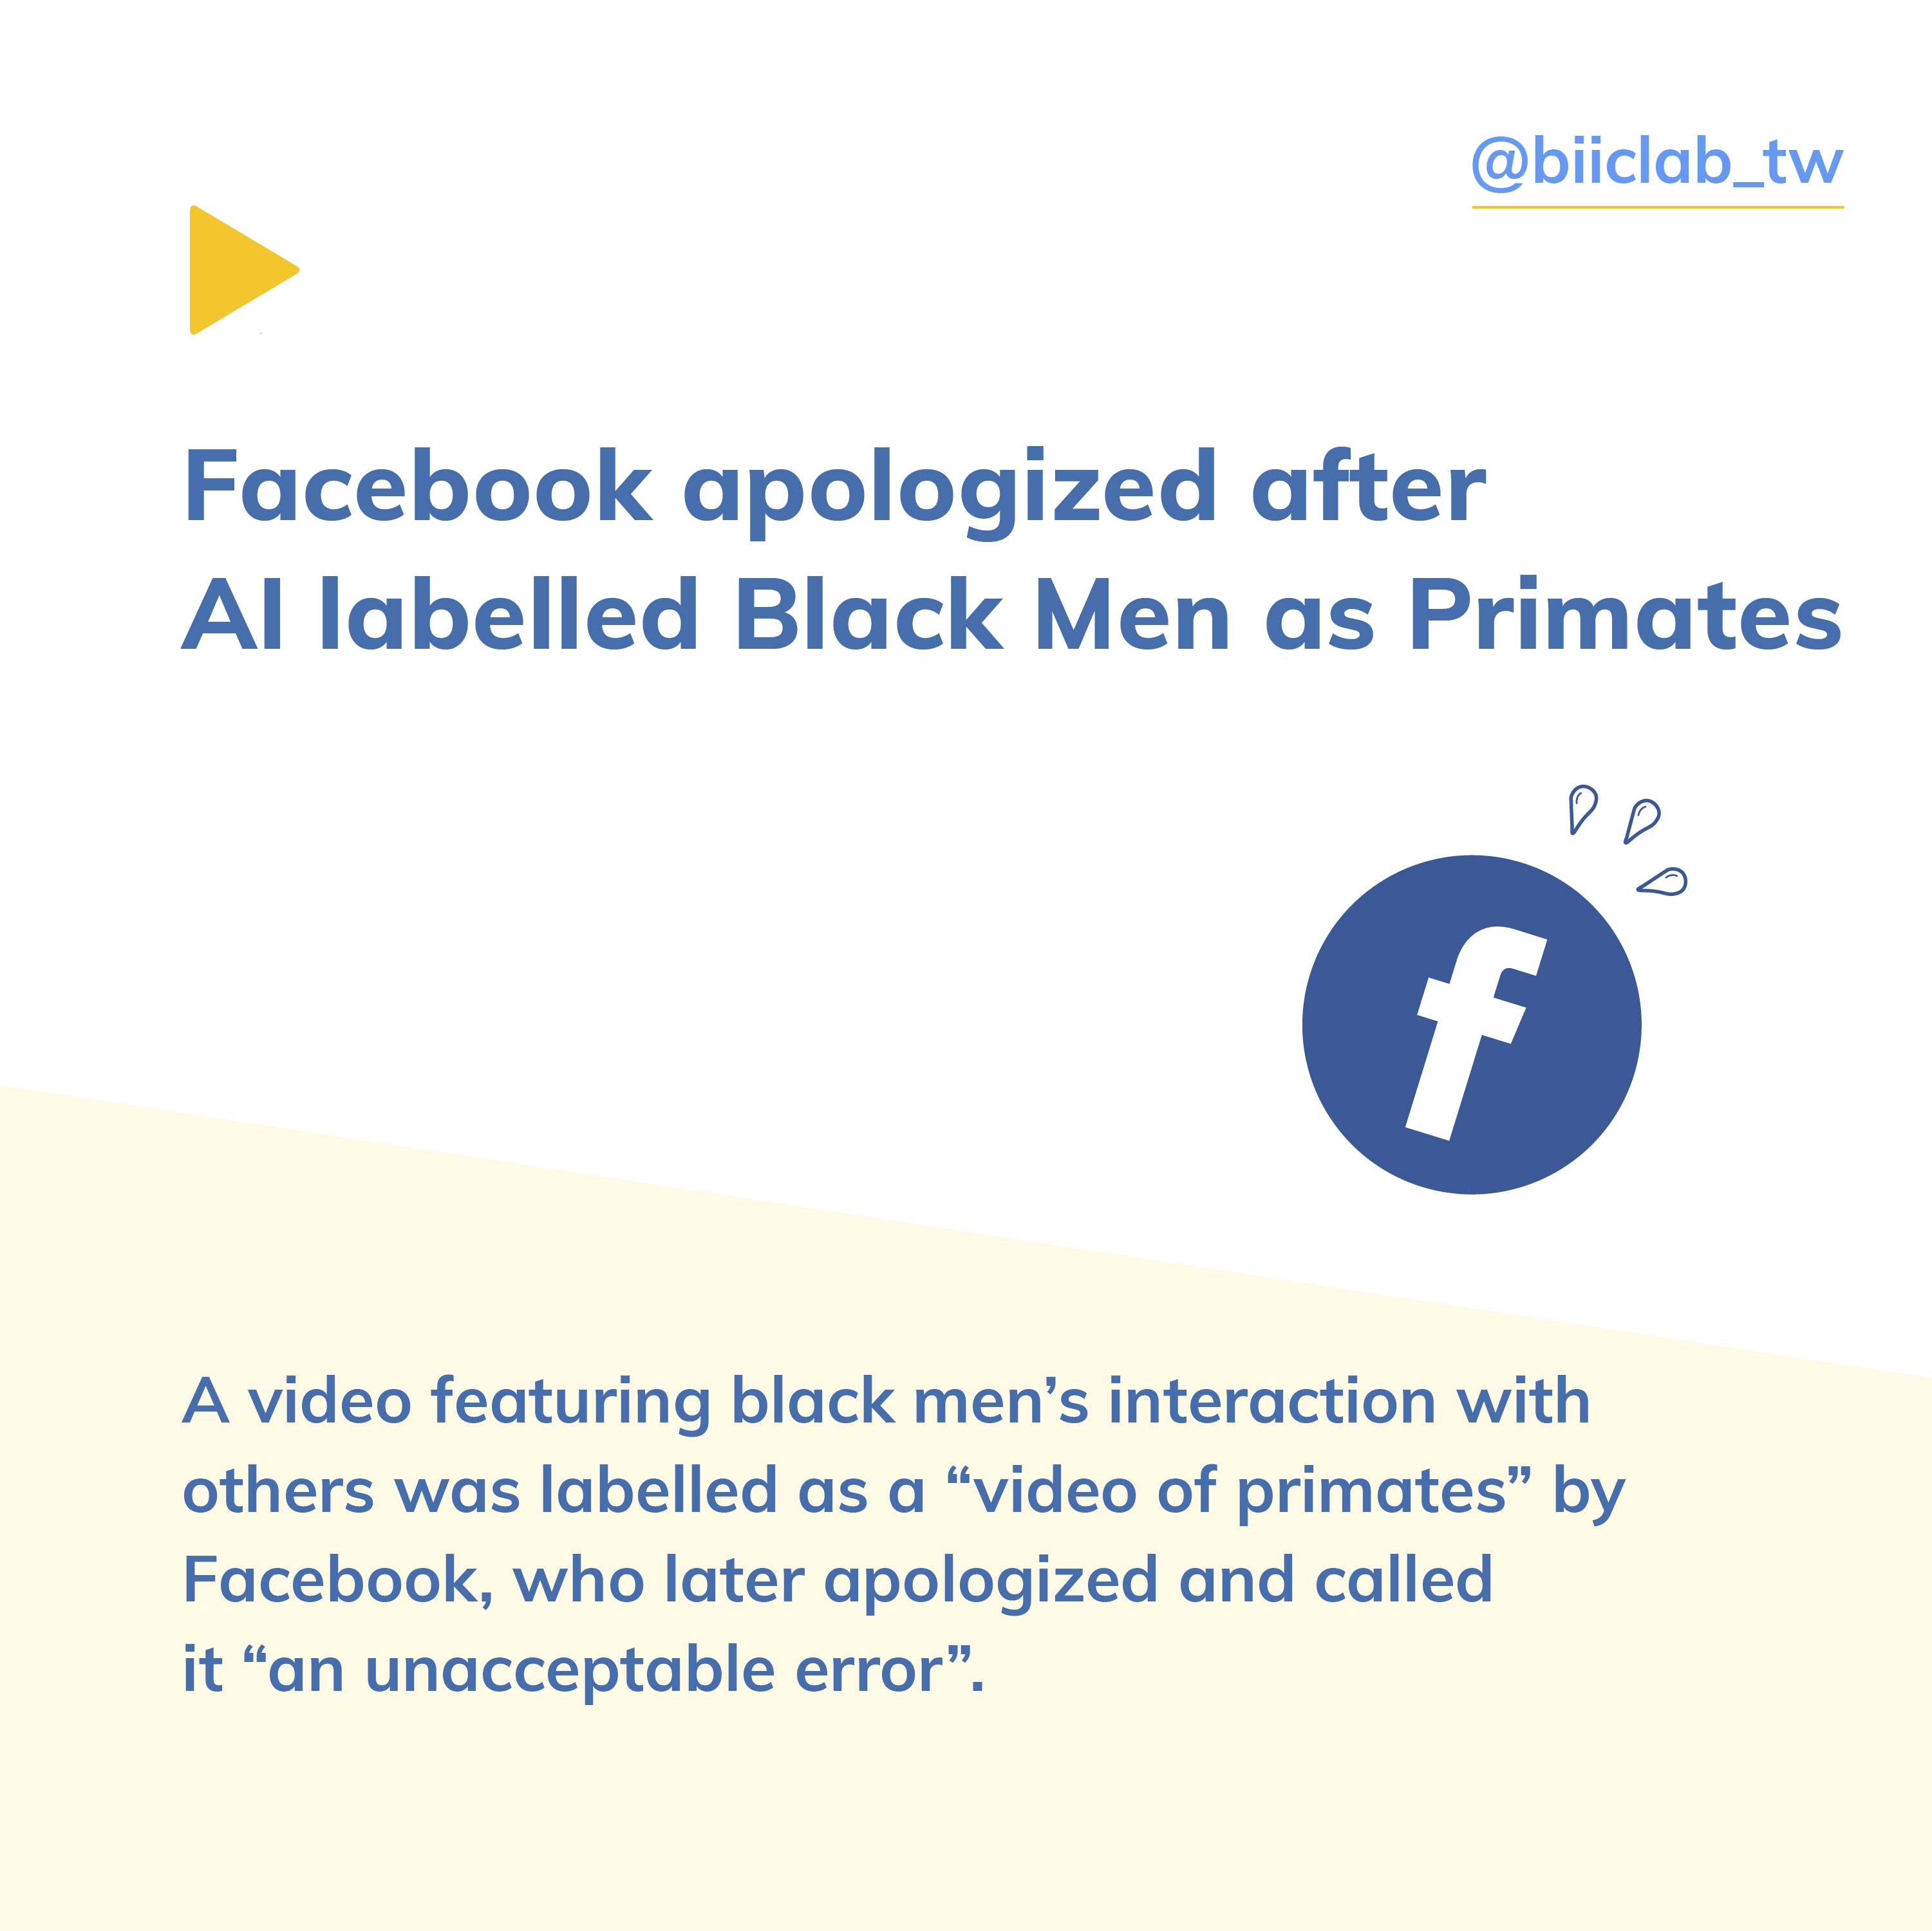 Facebook apologized after AI labelled Black Men as Primates